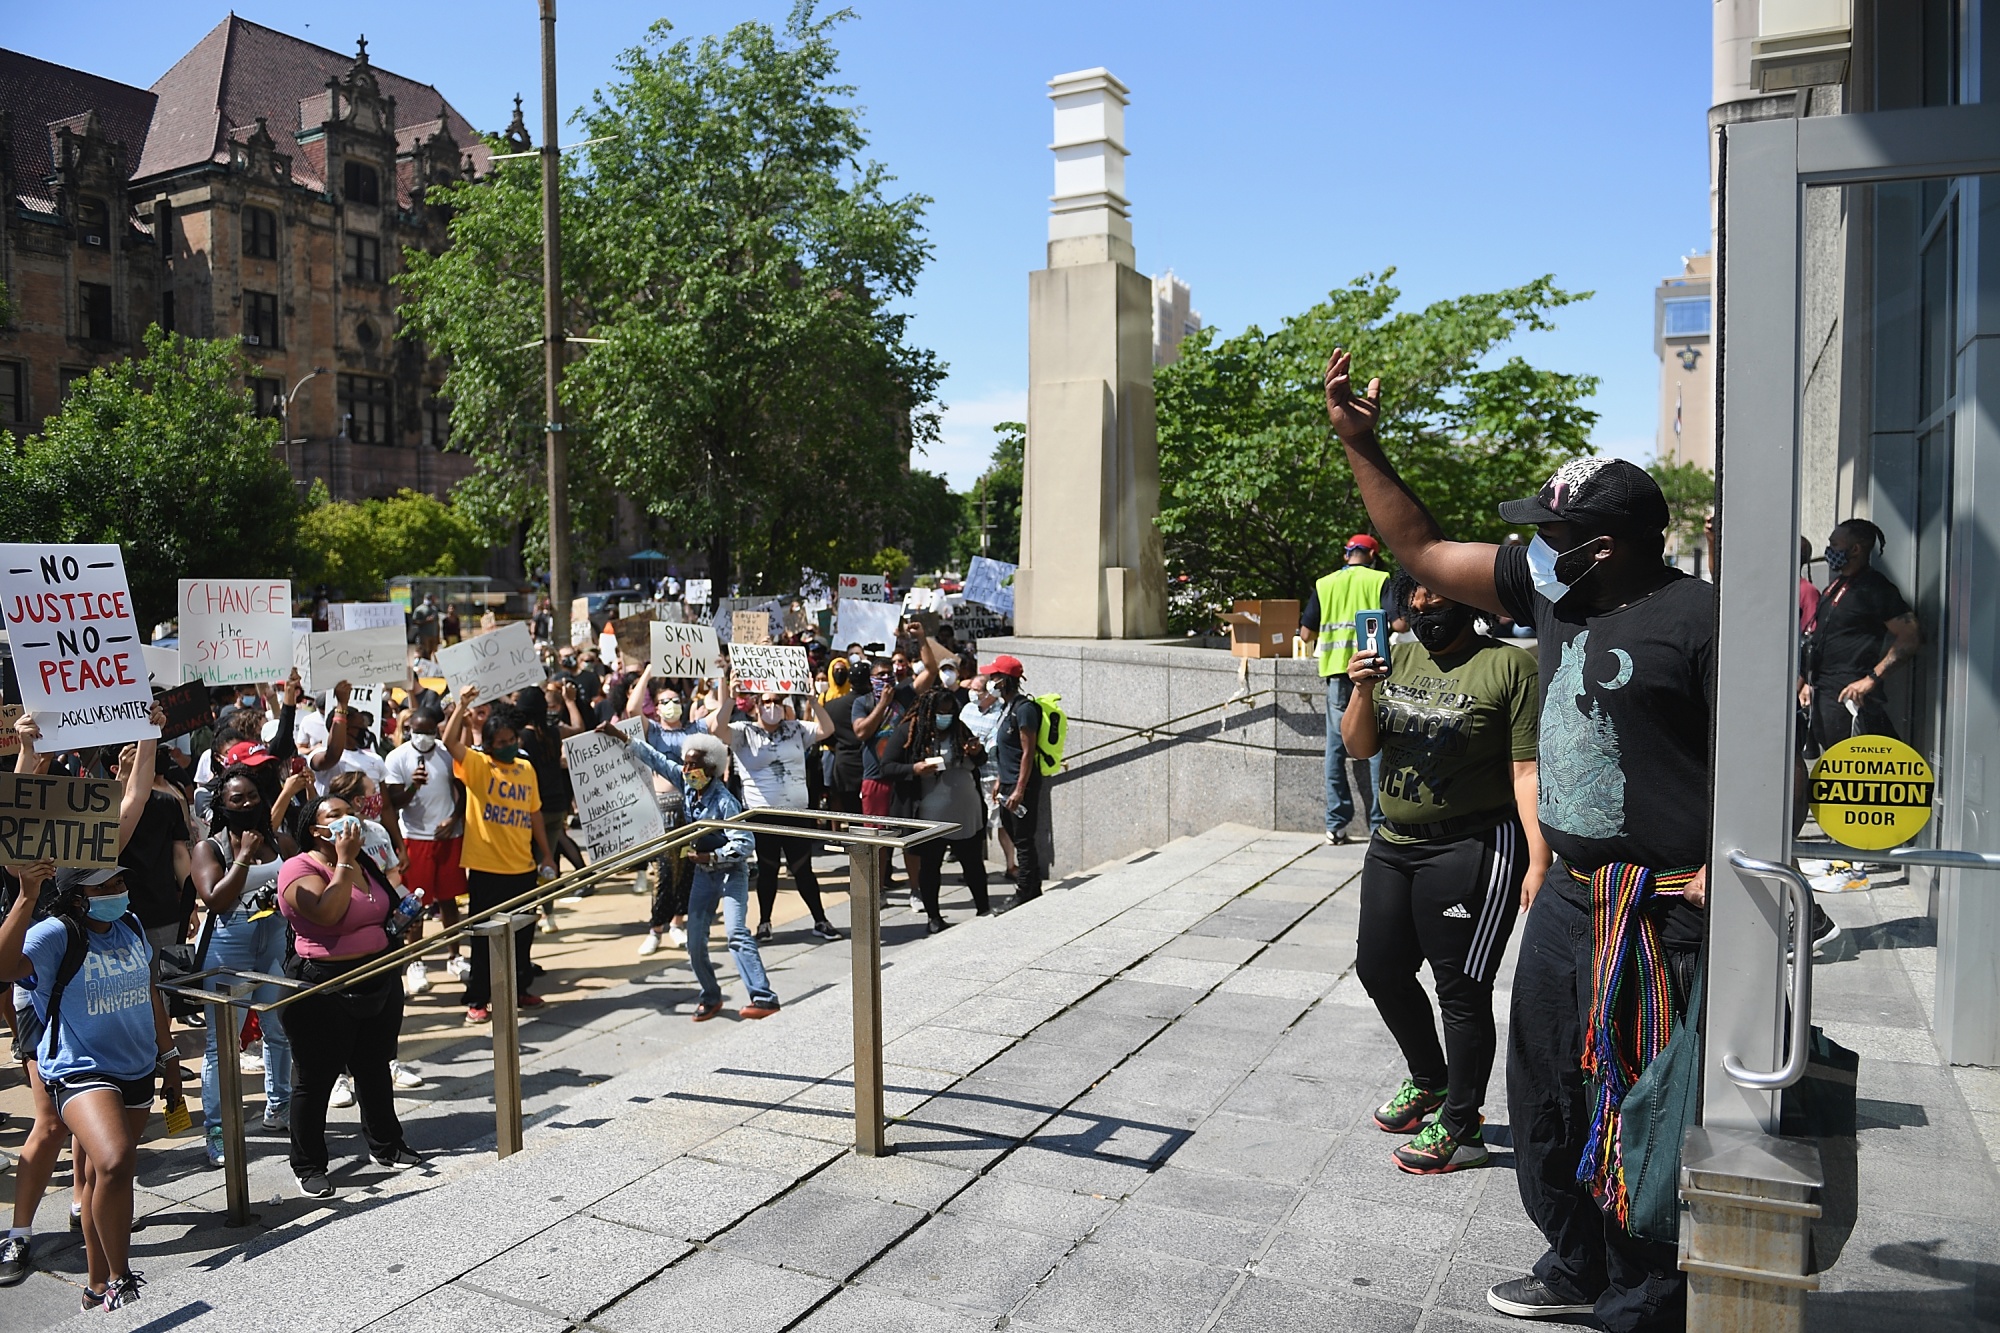 Before this month’s uprising at the St. Louis City Justice Center, protesters gathered there last June to demonstrate against police brutality and the killing of&nbsp;George Floyd.